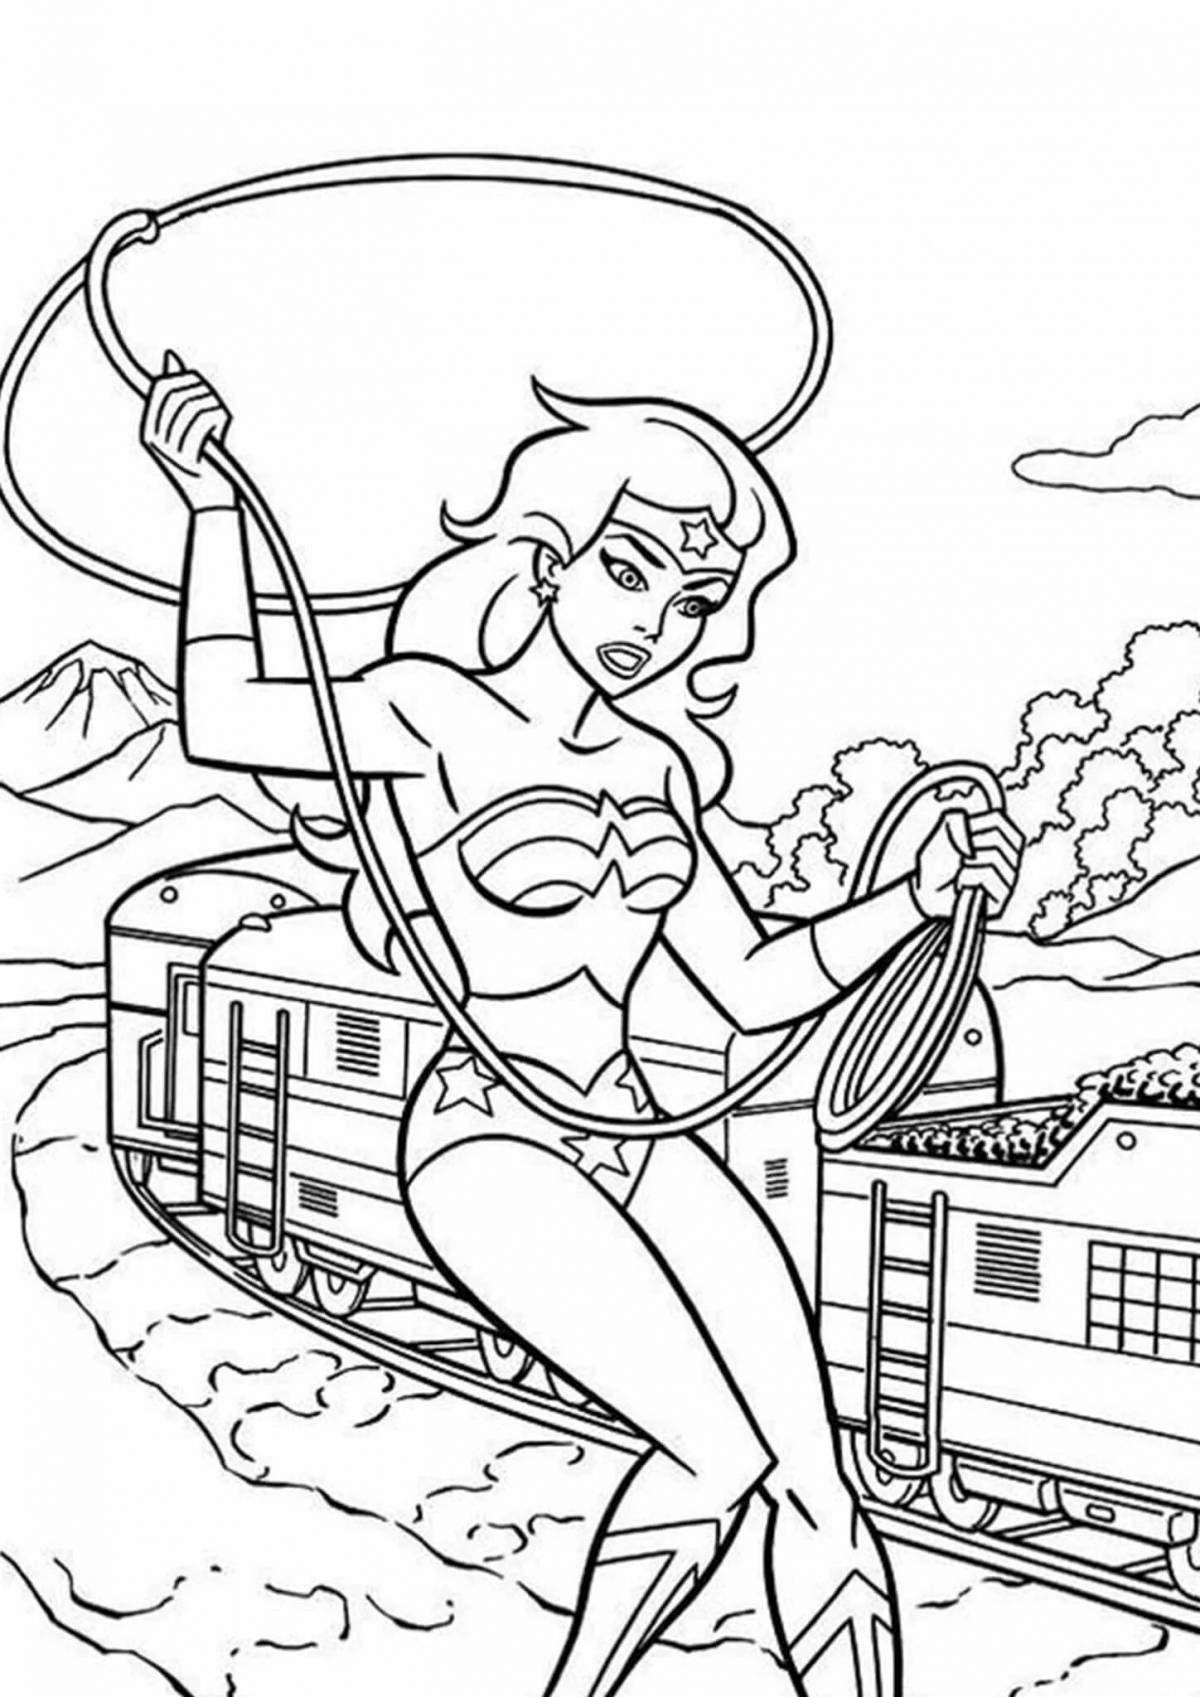 Inviting miracle coloring book